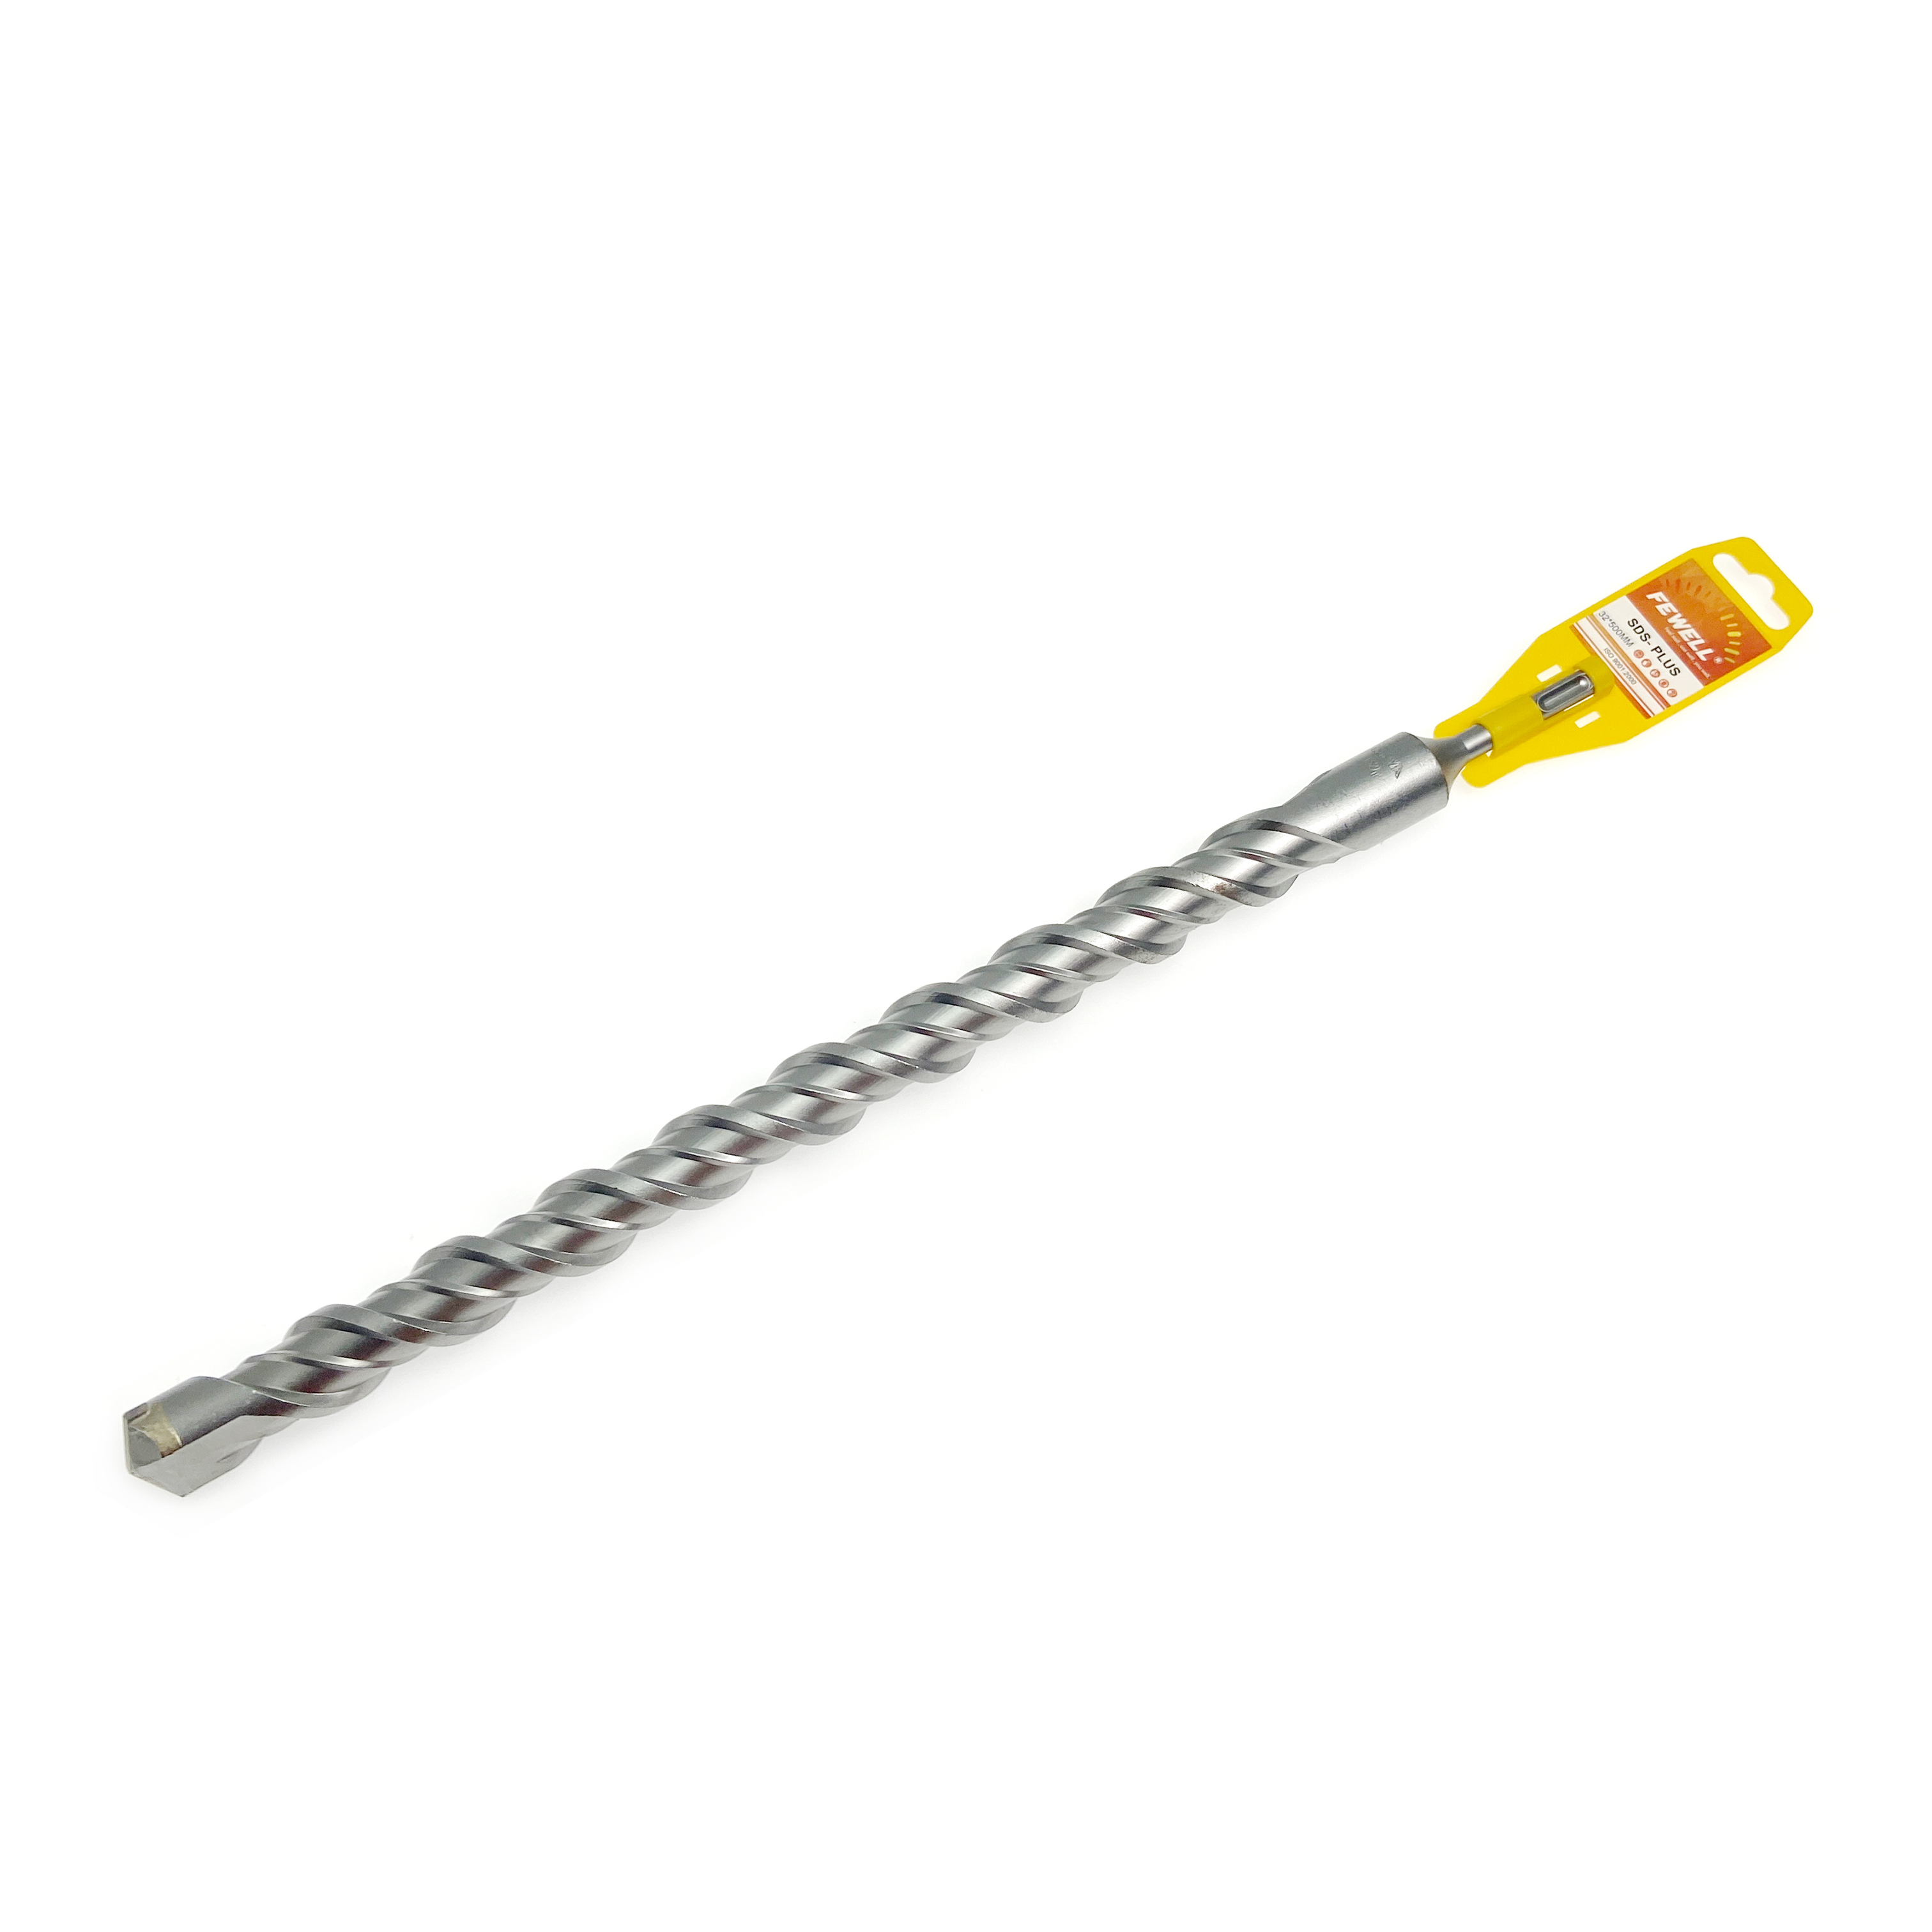 High quality SDS Plus Carbide Single Tip 32*500/600/800/1000mm Double Flute Electric Hammer Drill Bit for Concrete wall Masonry Stone Granite